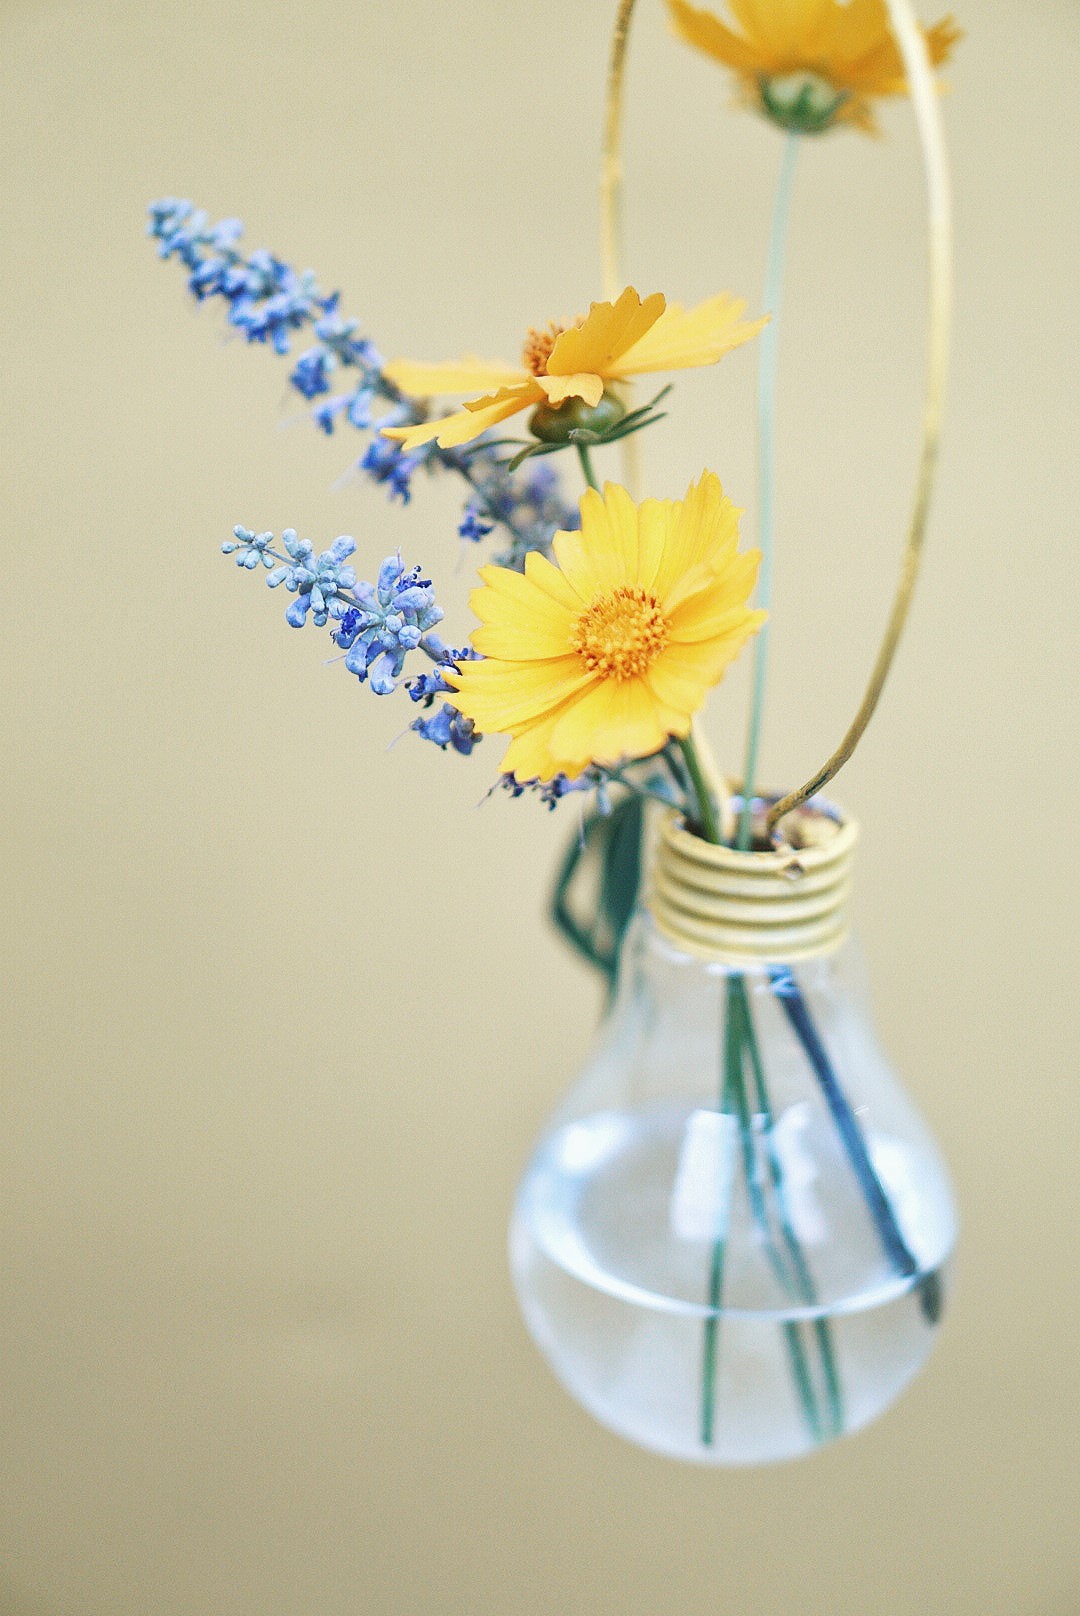 Light bulb with flowers